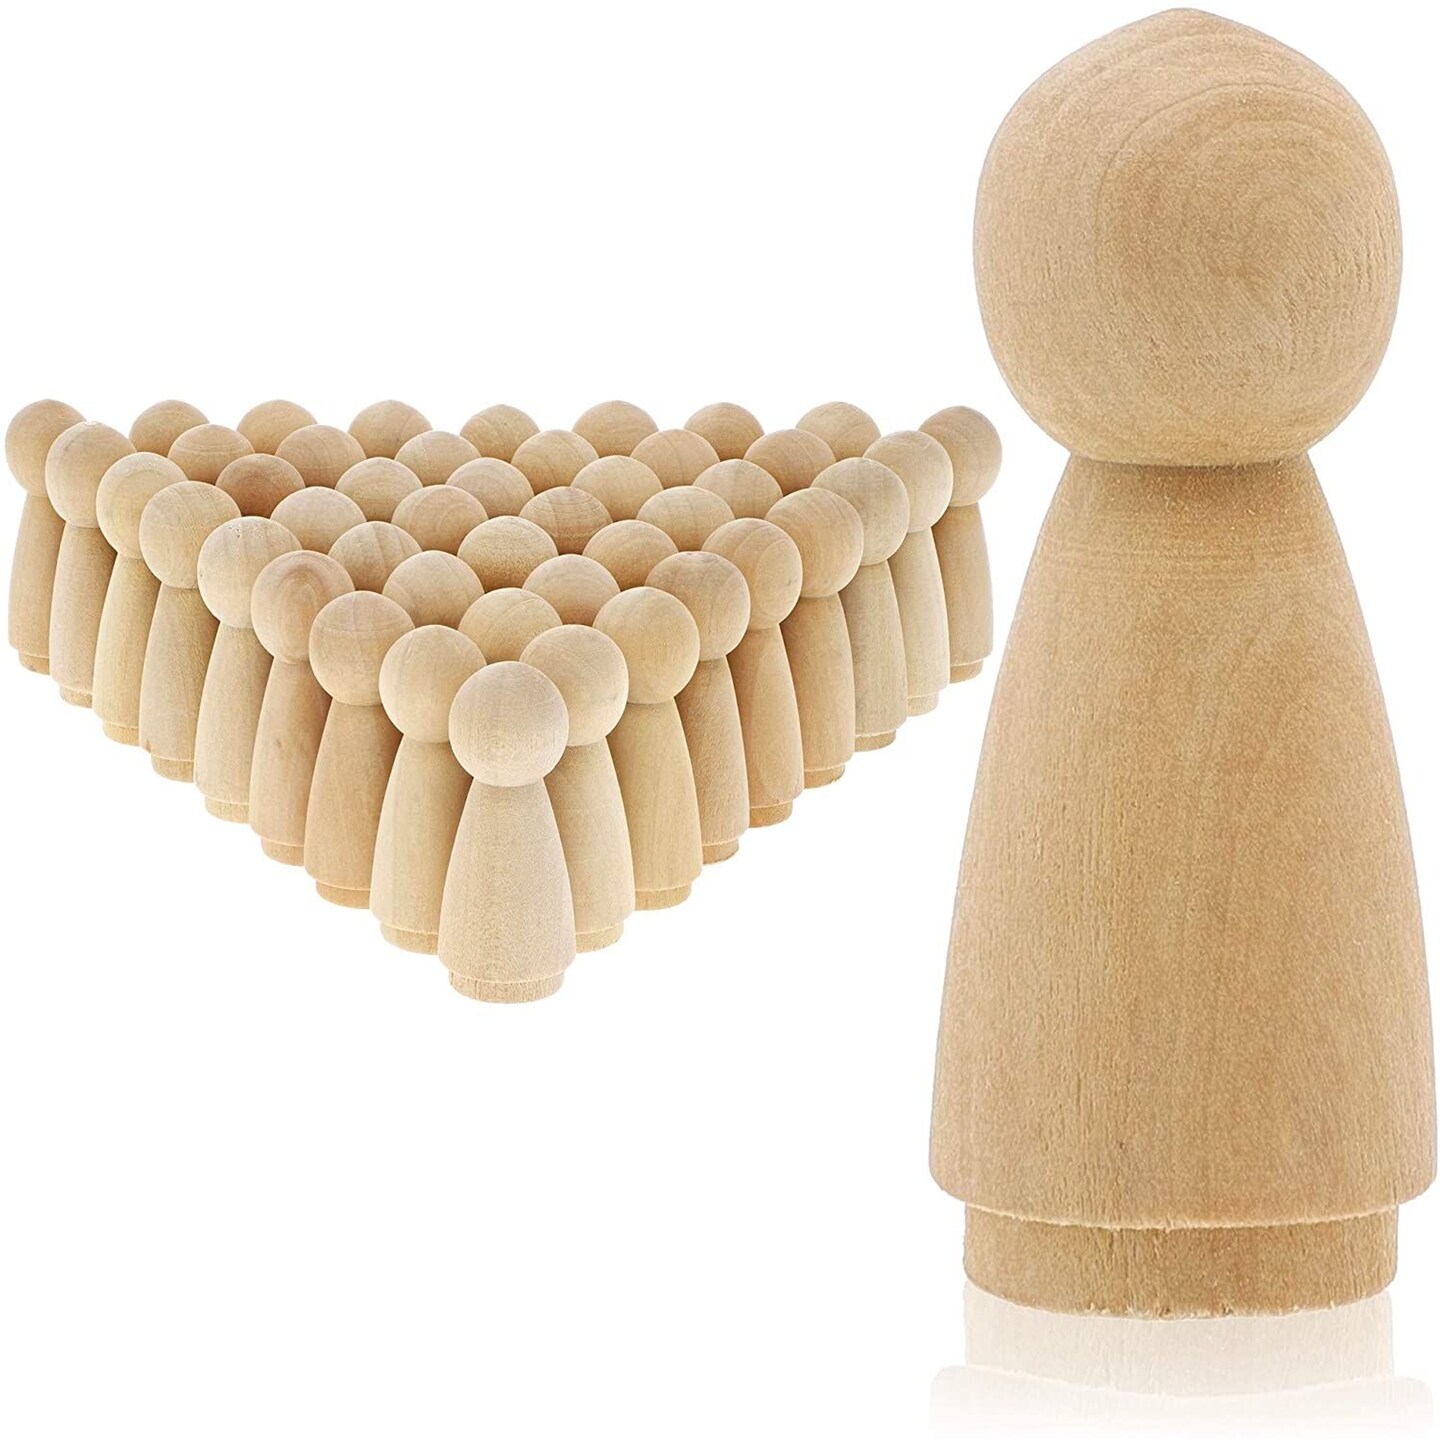 50 Pack Small Unfinished Wooden Peg People for DIY Crafts, Doll Kit for Painting and Decorating (2 In)